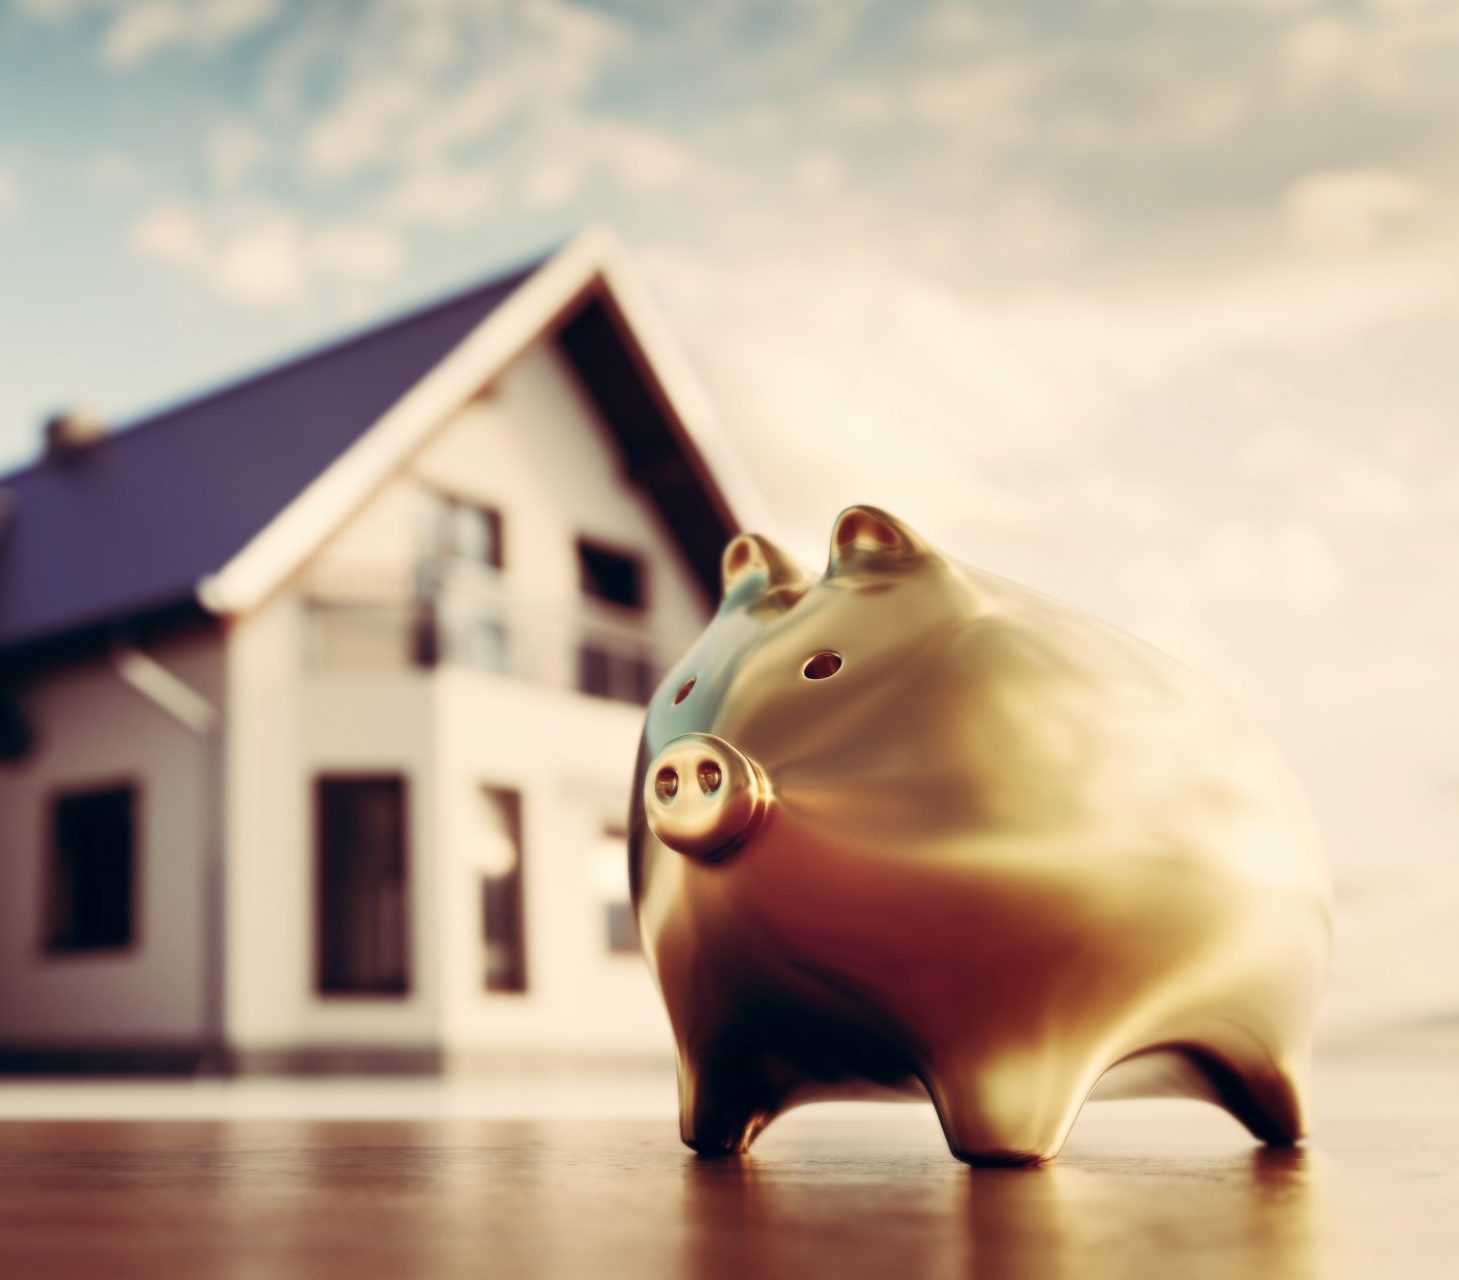 Piggybank and new house, saving for home, mortgage. Golden piggy bank. 3D illustration